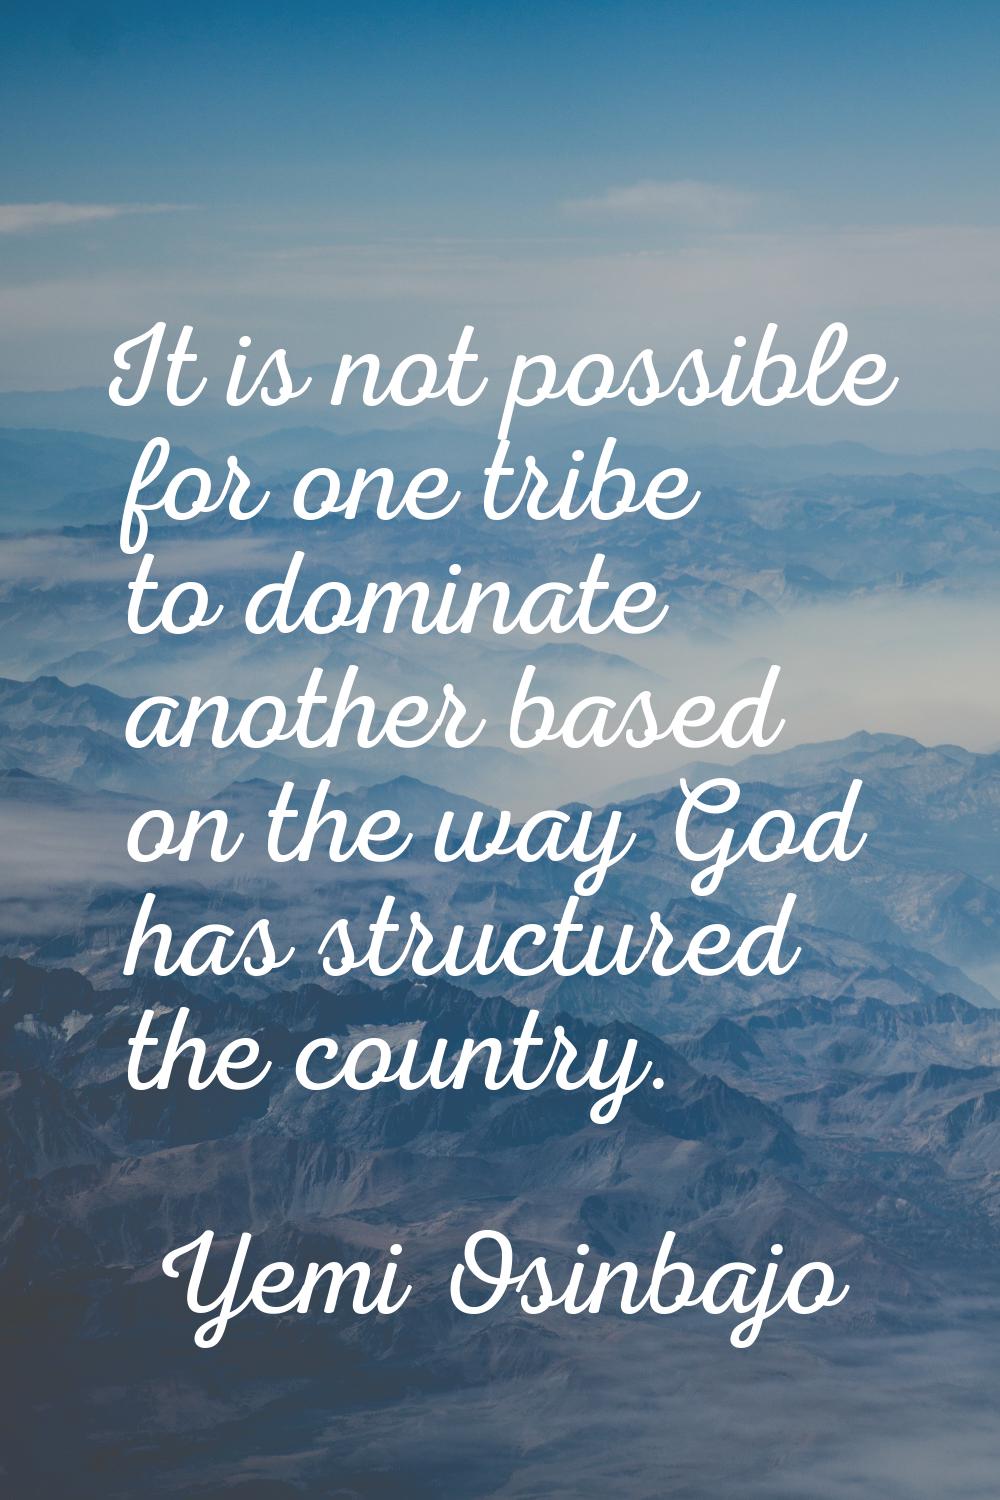 It is not possible for one tribe to dominate another based on the way God has structured the countr